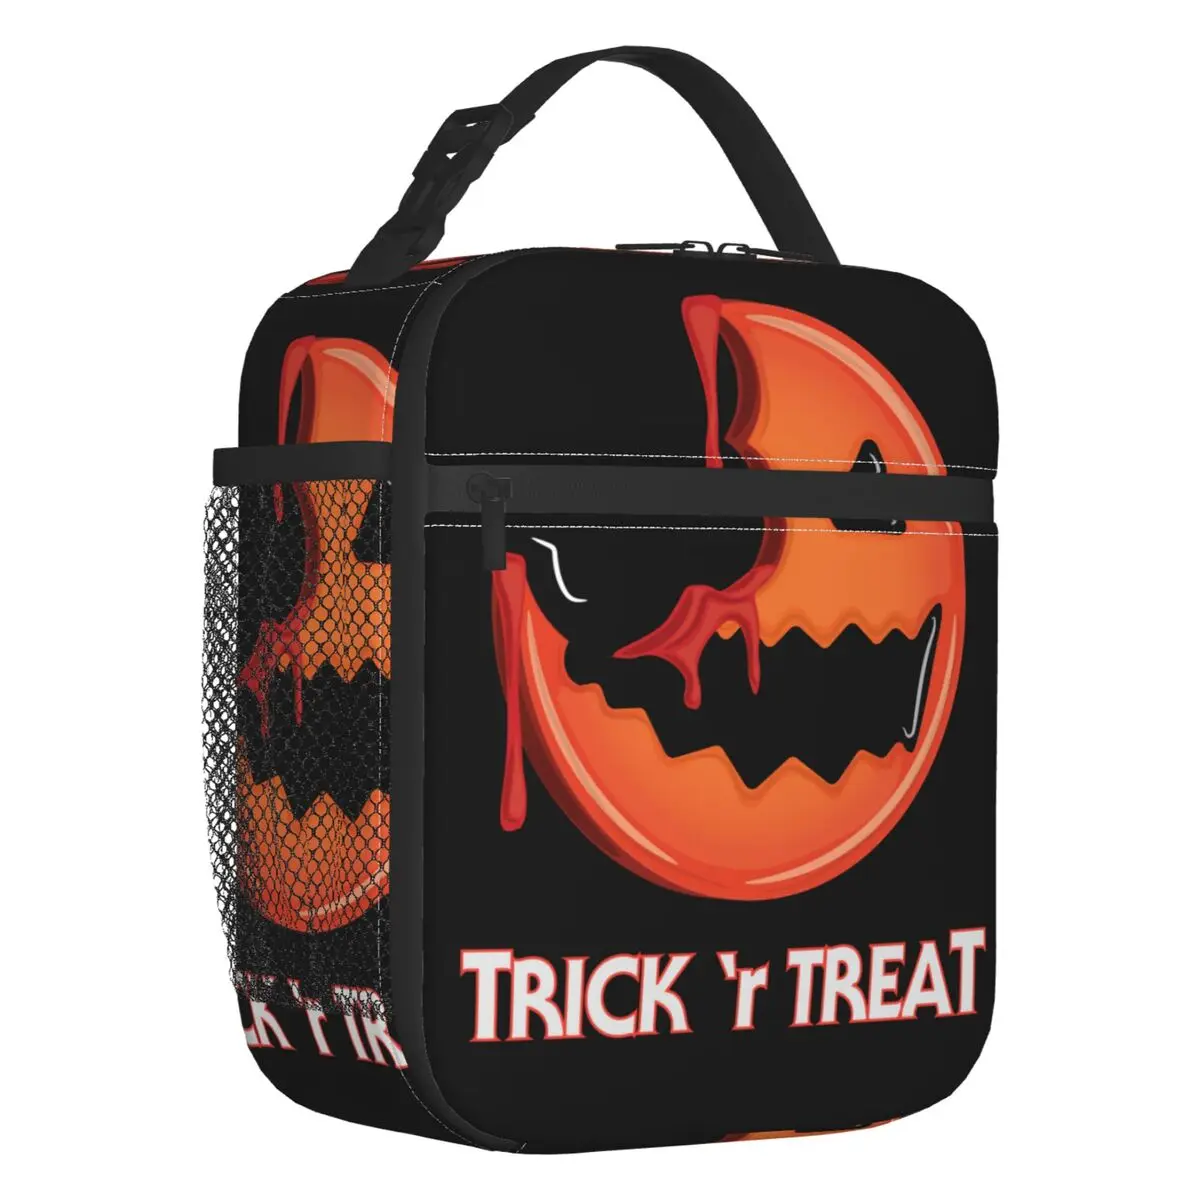 

Trick R Treat Sam Halloween Horror Film Insulated Lunch Bags for Work School Leakproof Thermal Cooler Bento Box Women Kids